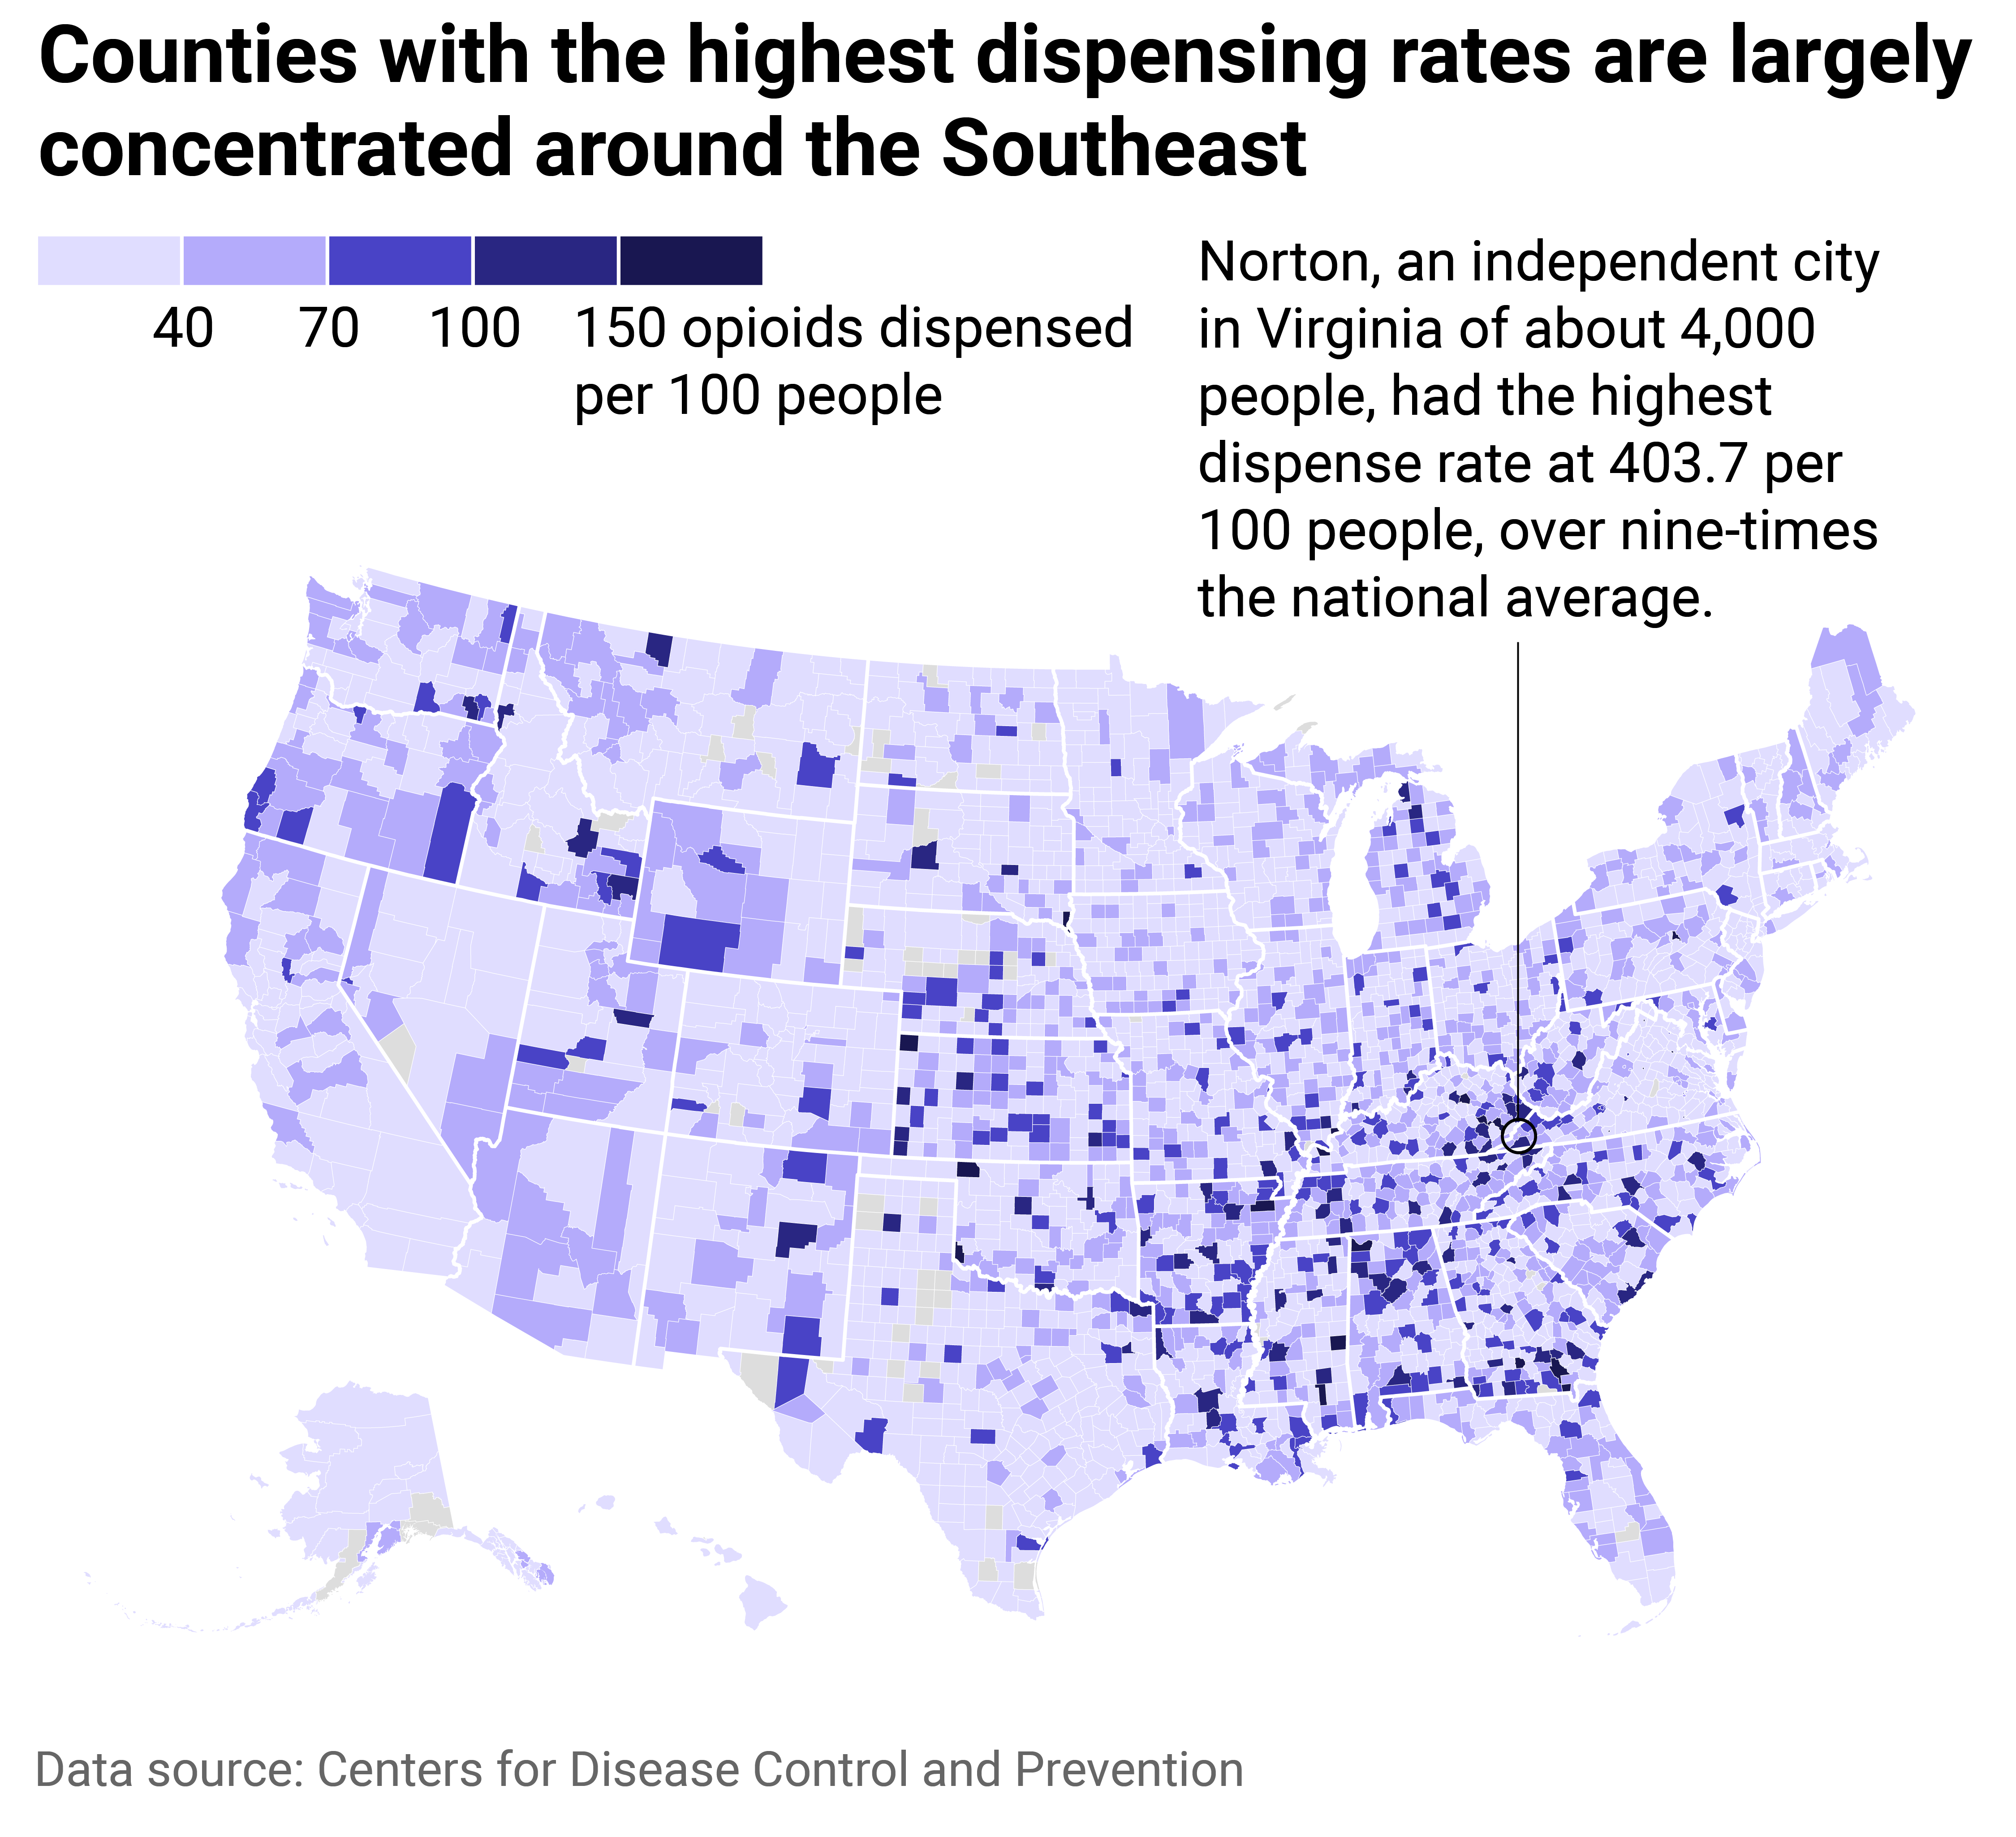 County Map showing counties with the highest dispensing rates are largely concentrated around Southeast. 